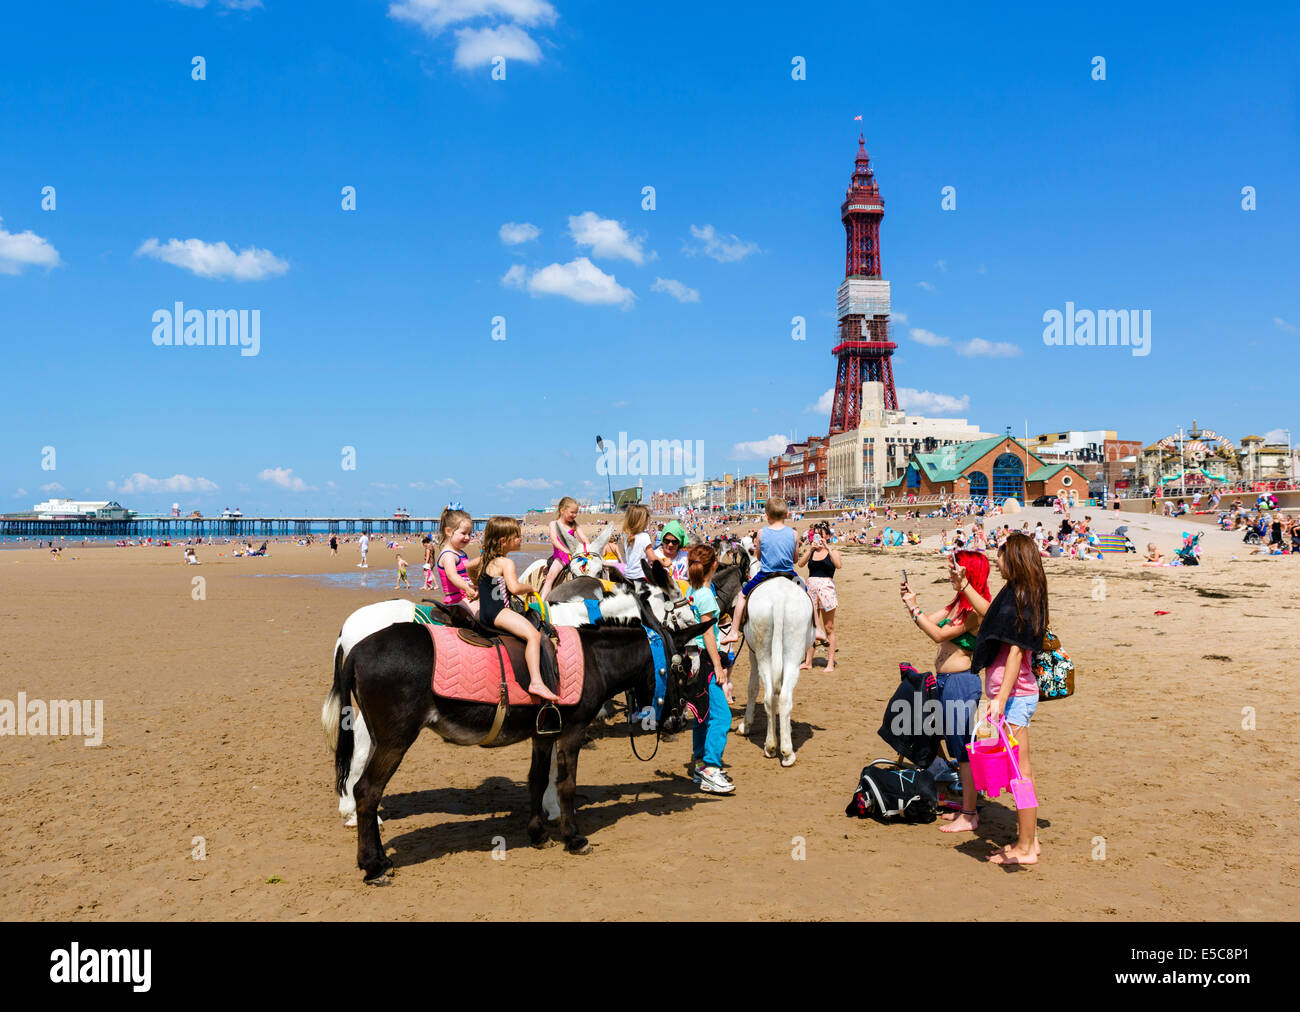 Donkey rides on the beach looking towards North Pier and Blackpool Tower, The Golden Mile, Blackpool, Lancashire, UK Stock Photo